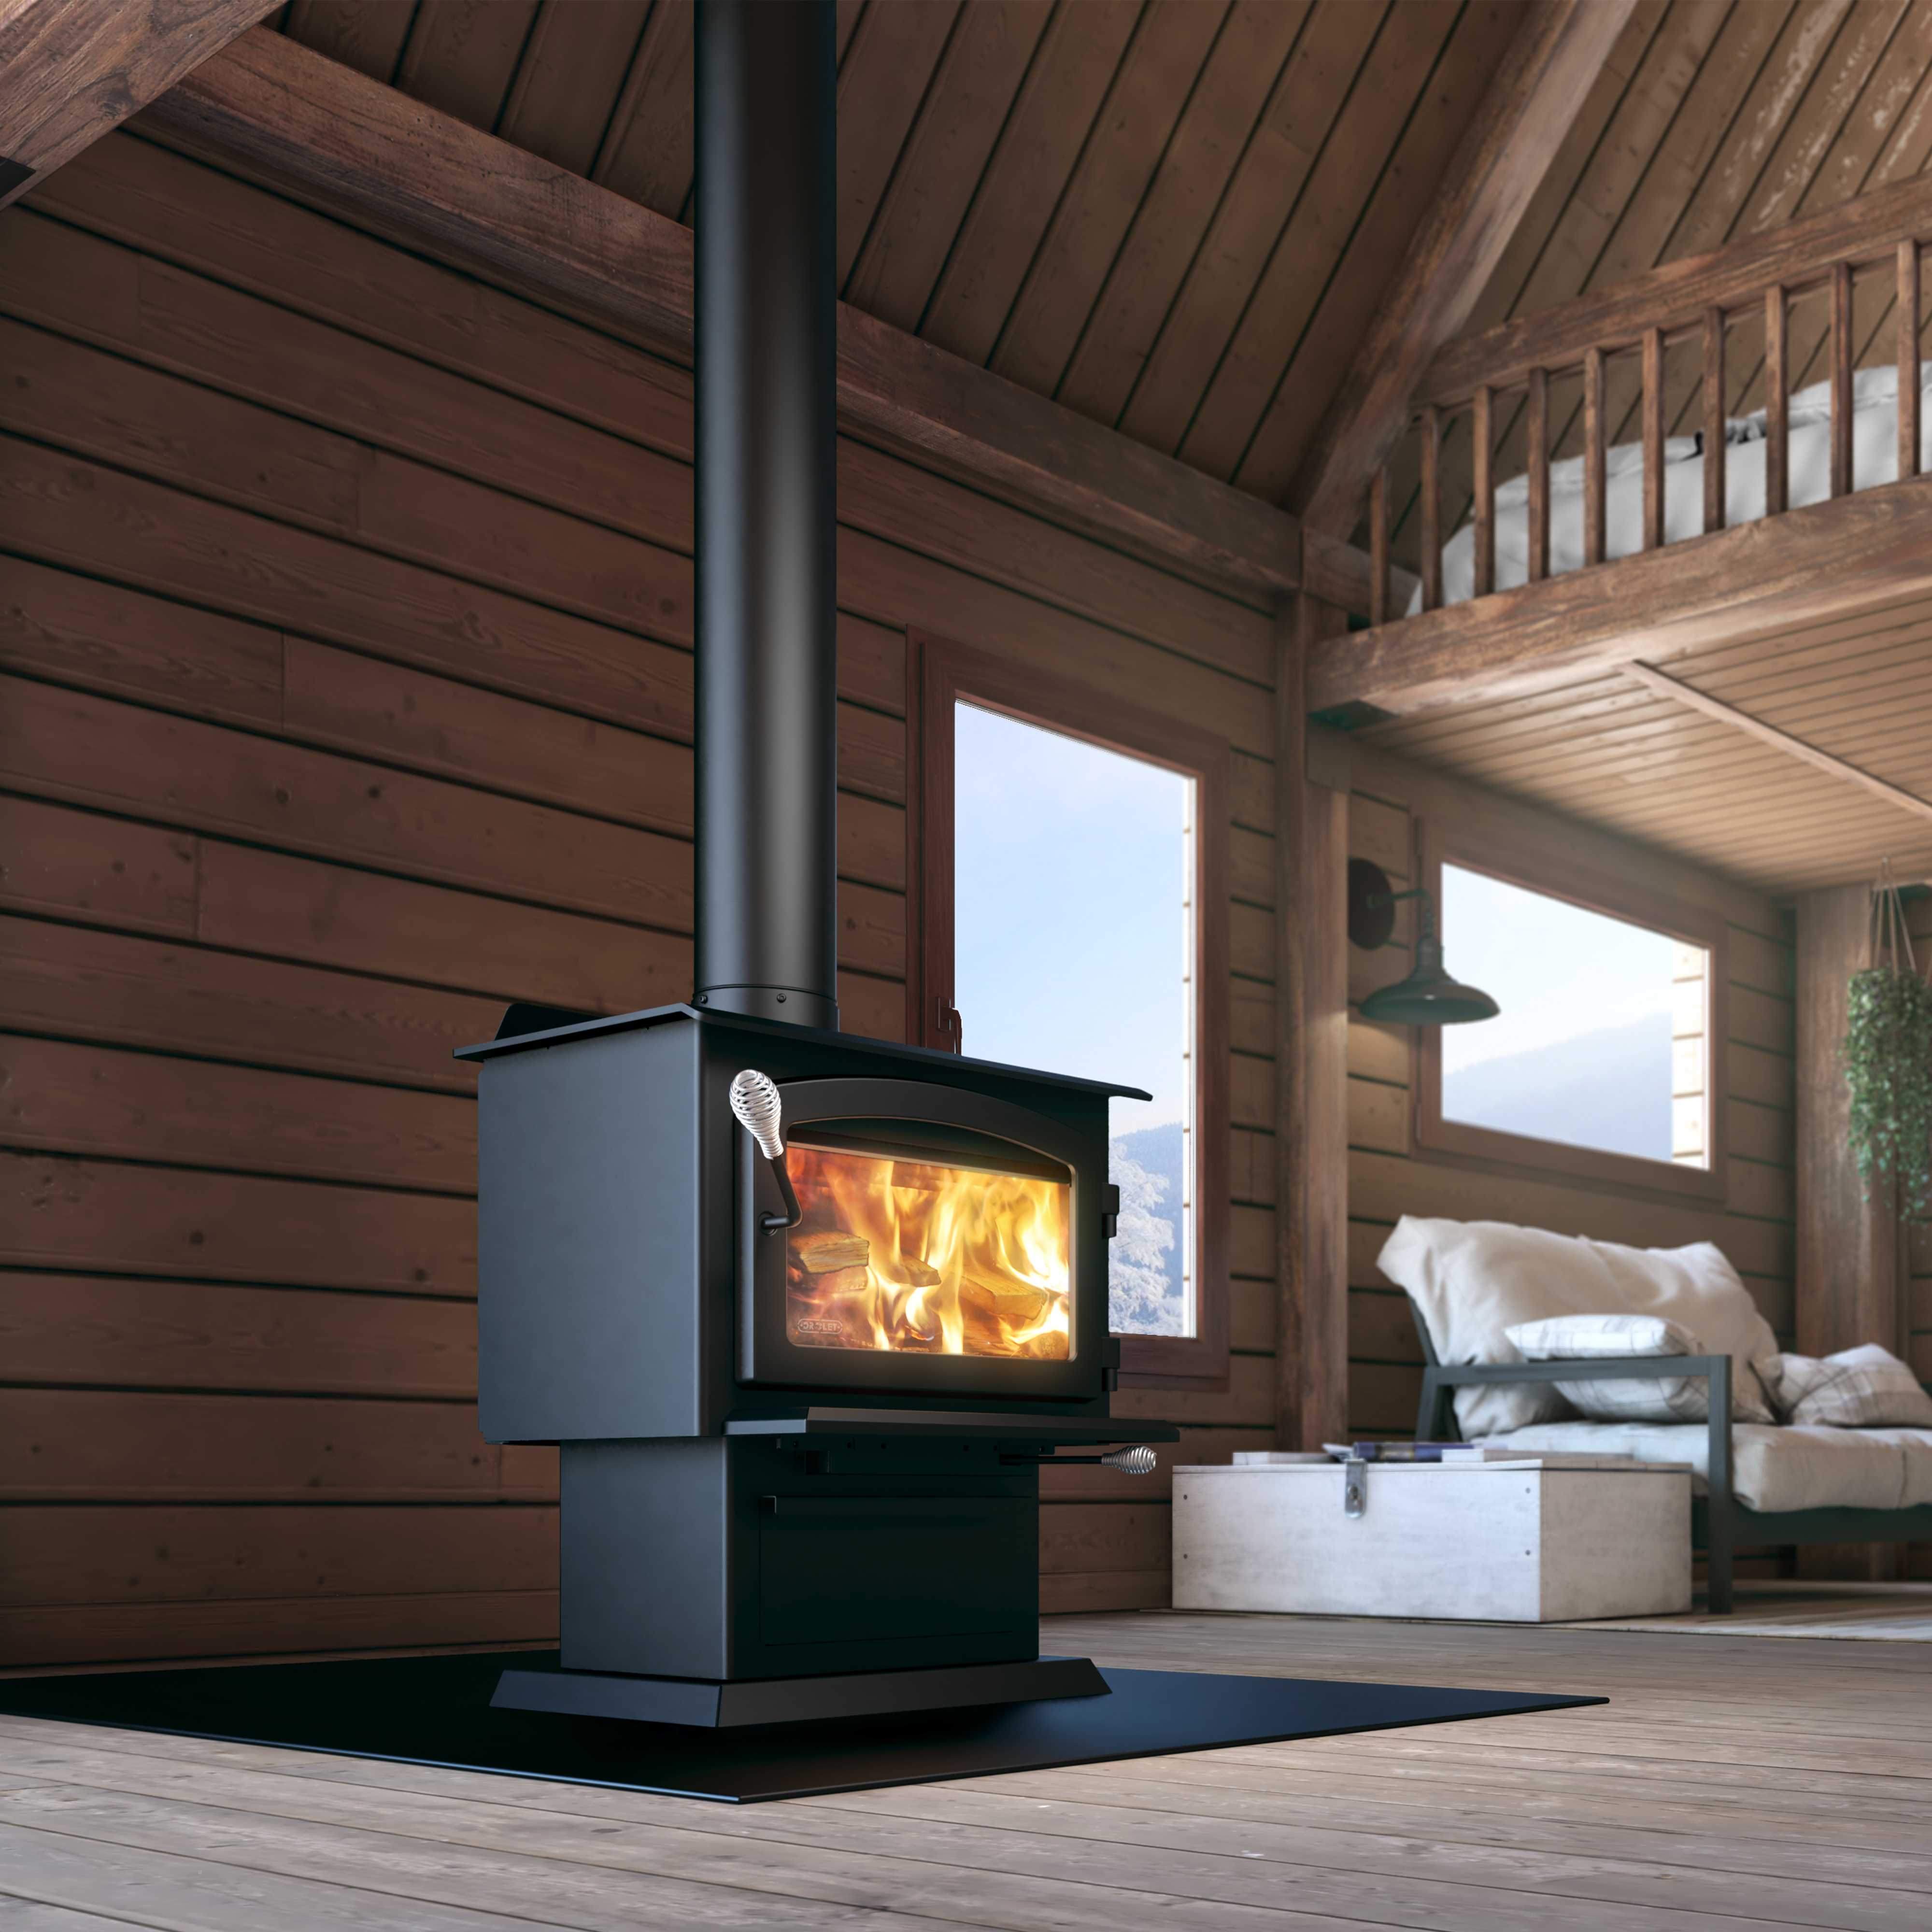 Top Reasons to Buy a Wood Stove